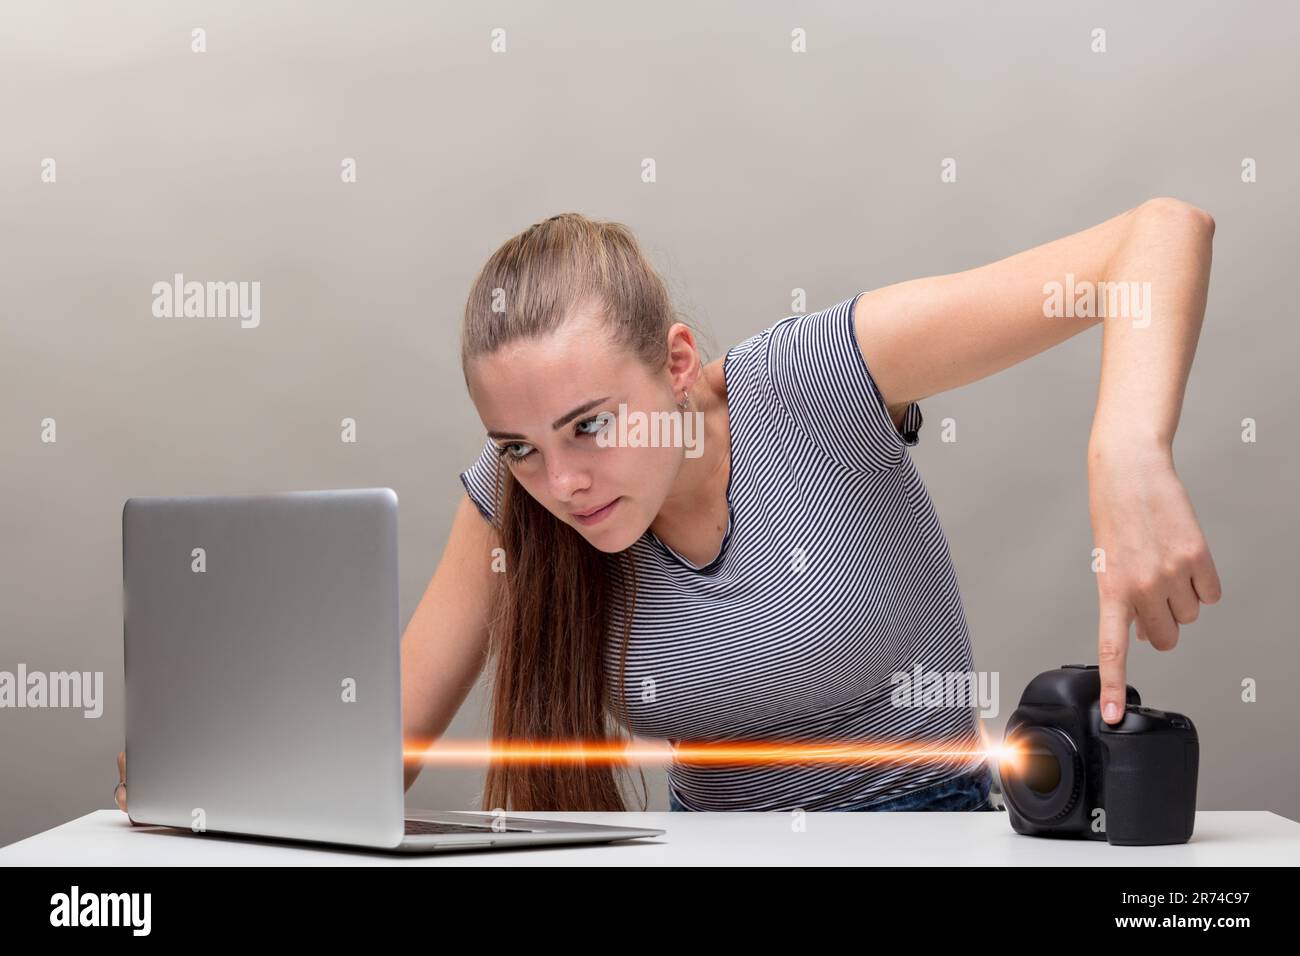 A focused woman, hair tied back and in a striped shirt, wirelessly transfers photo and video files from her digital camera to her laptop. She hits the Stock Photo